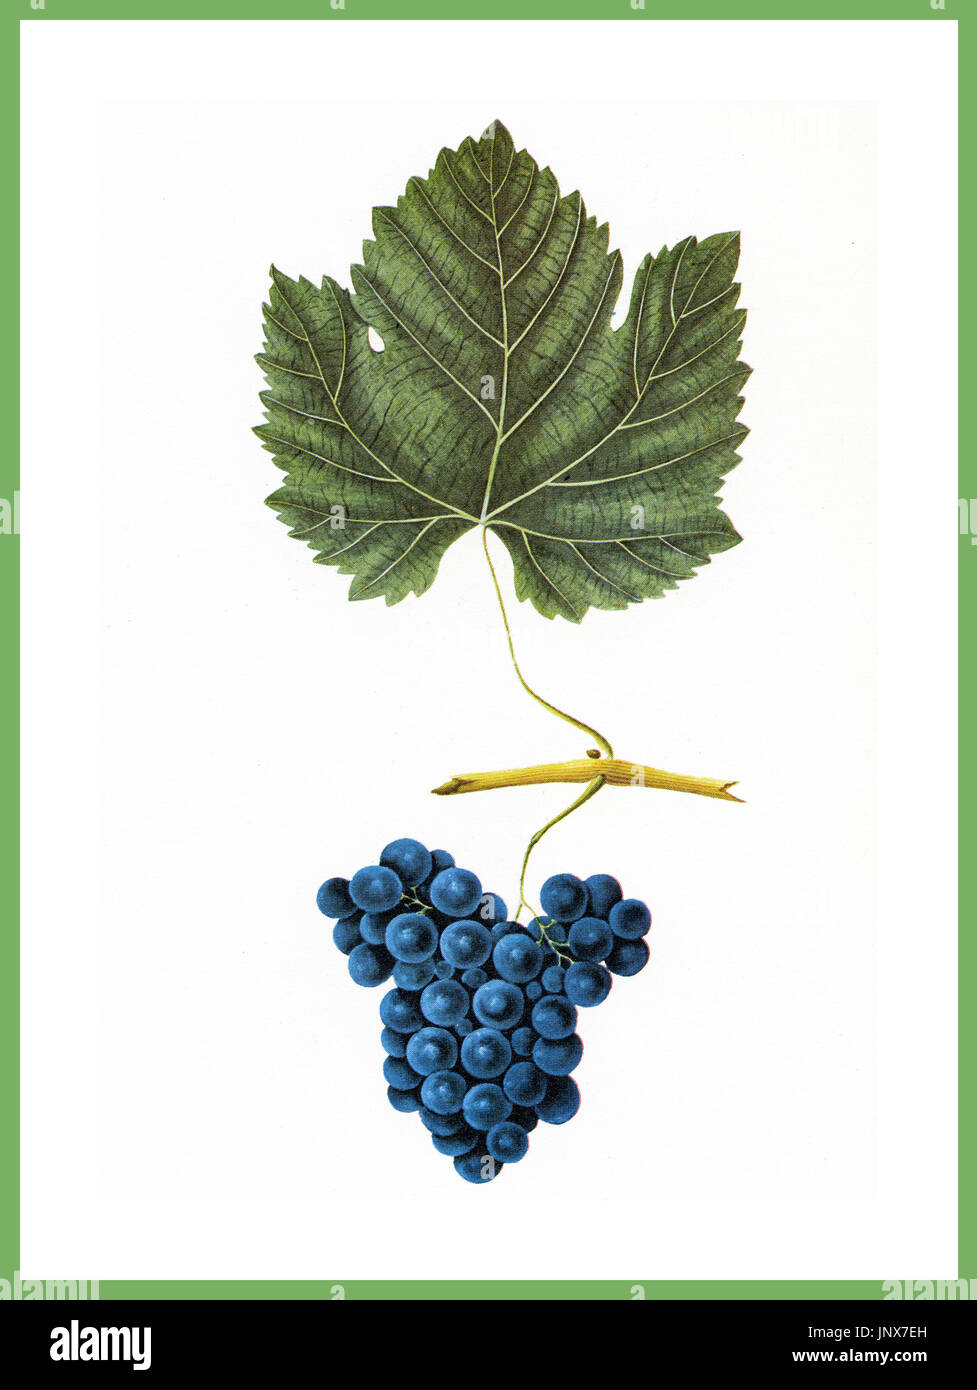 PINOT NOIR GRAPES BUNCH Watercolour Illustration of a Pinot Noir Grape bunch and leaf on white background Pinot Noir is a red wine grape variety of the species Vitis Vinifera. The name also refers to wines created predominantly from Pinot Noir grapes. The name is derived from the French words for pine and black Stock Photo